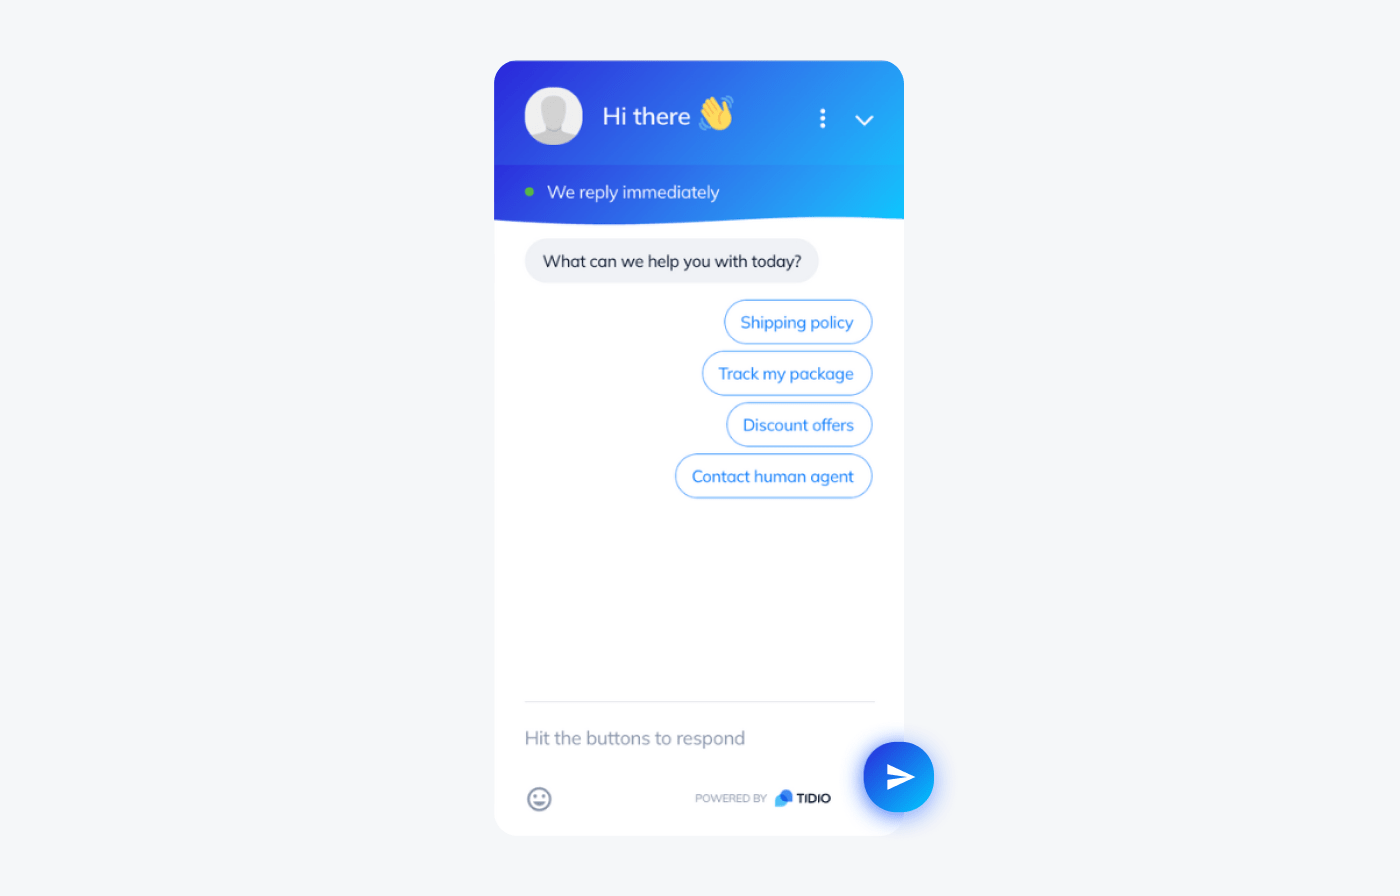 Adding a live chat widget powered by chatbots